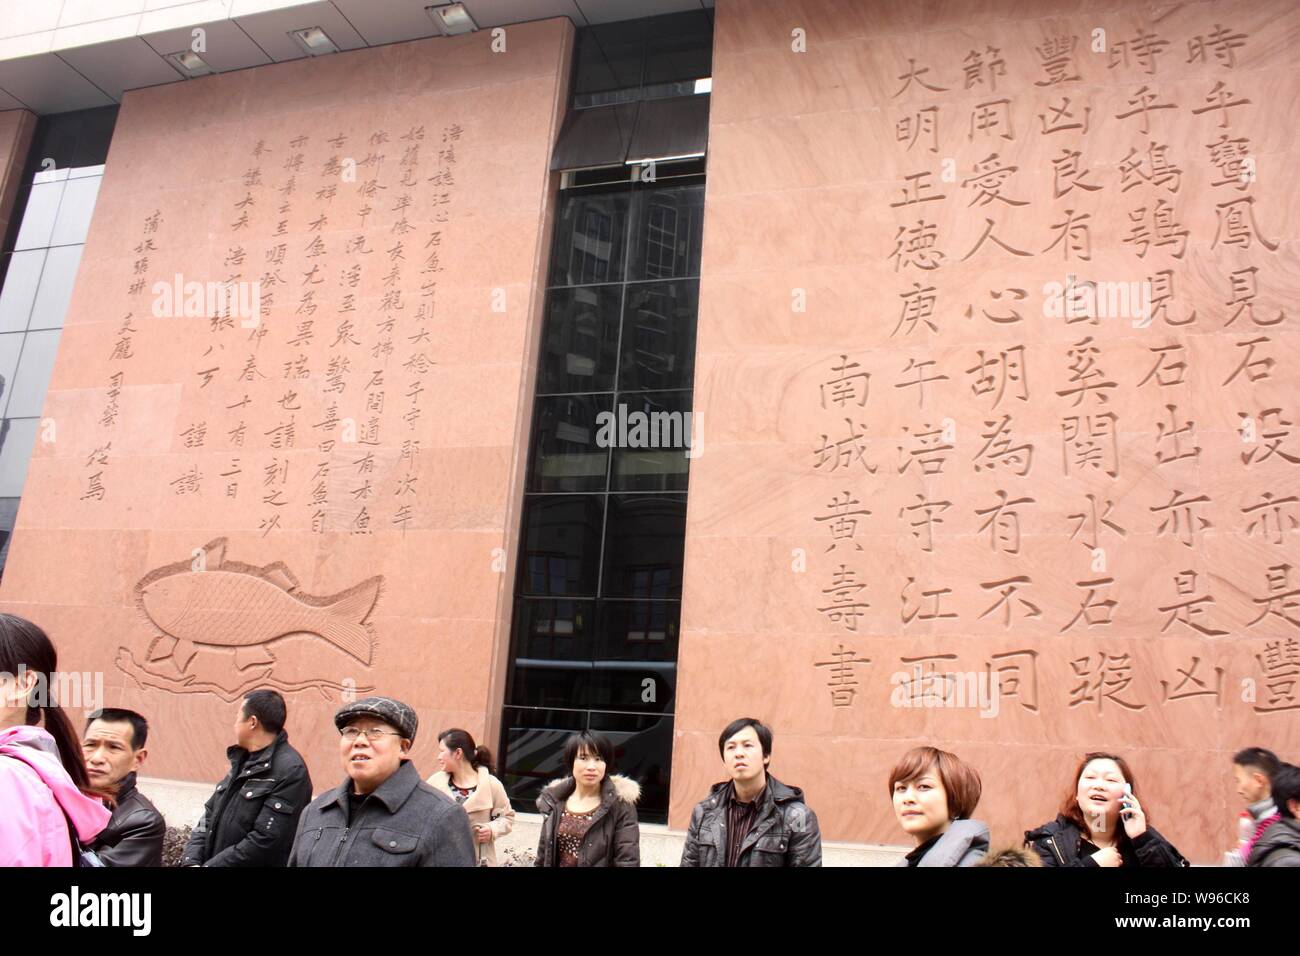 Visitors read the introduction of Baiheliang outside the underwater museum in Chongqing, China, 12 March 2012.   Baiheliang, an ancient hydrological m Stock Photo